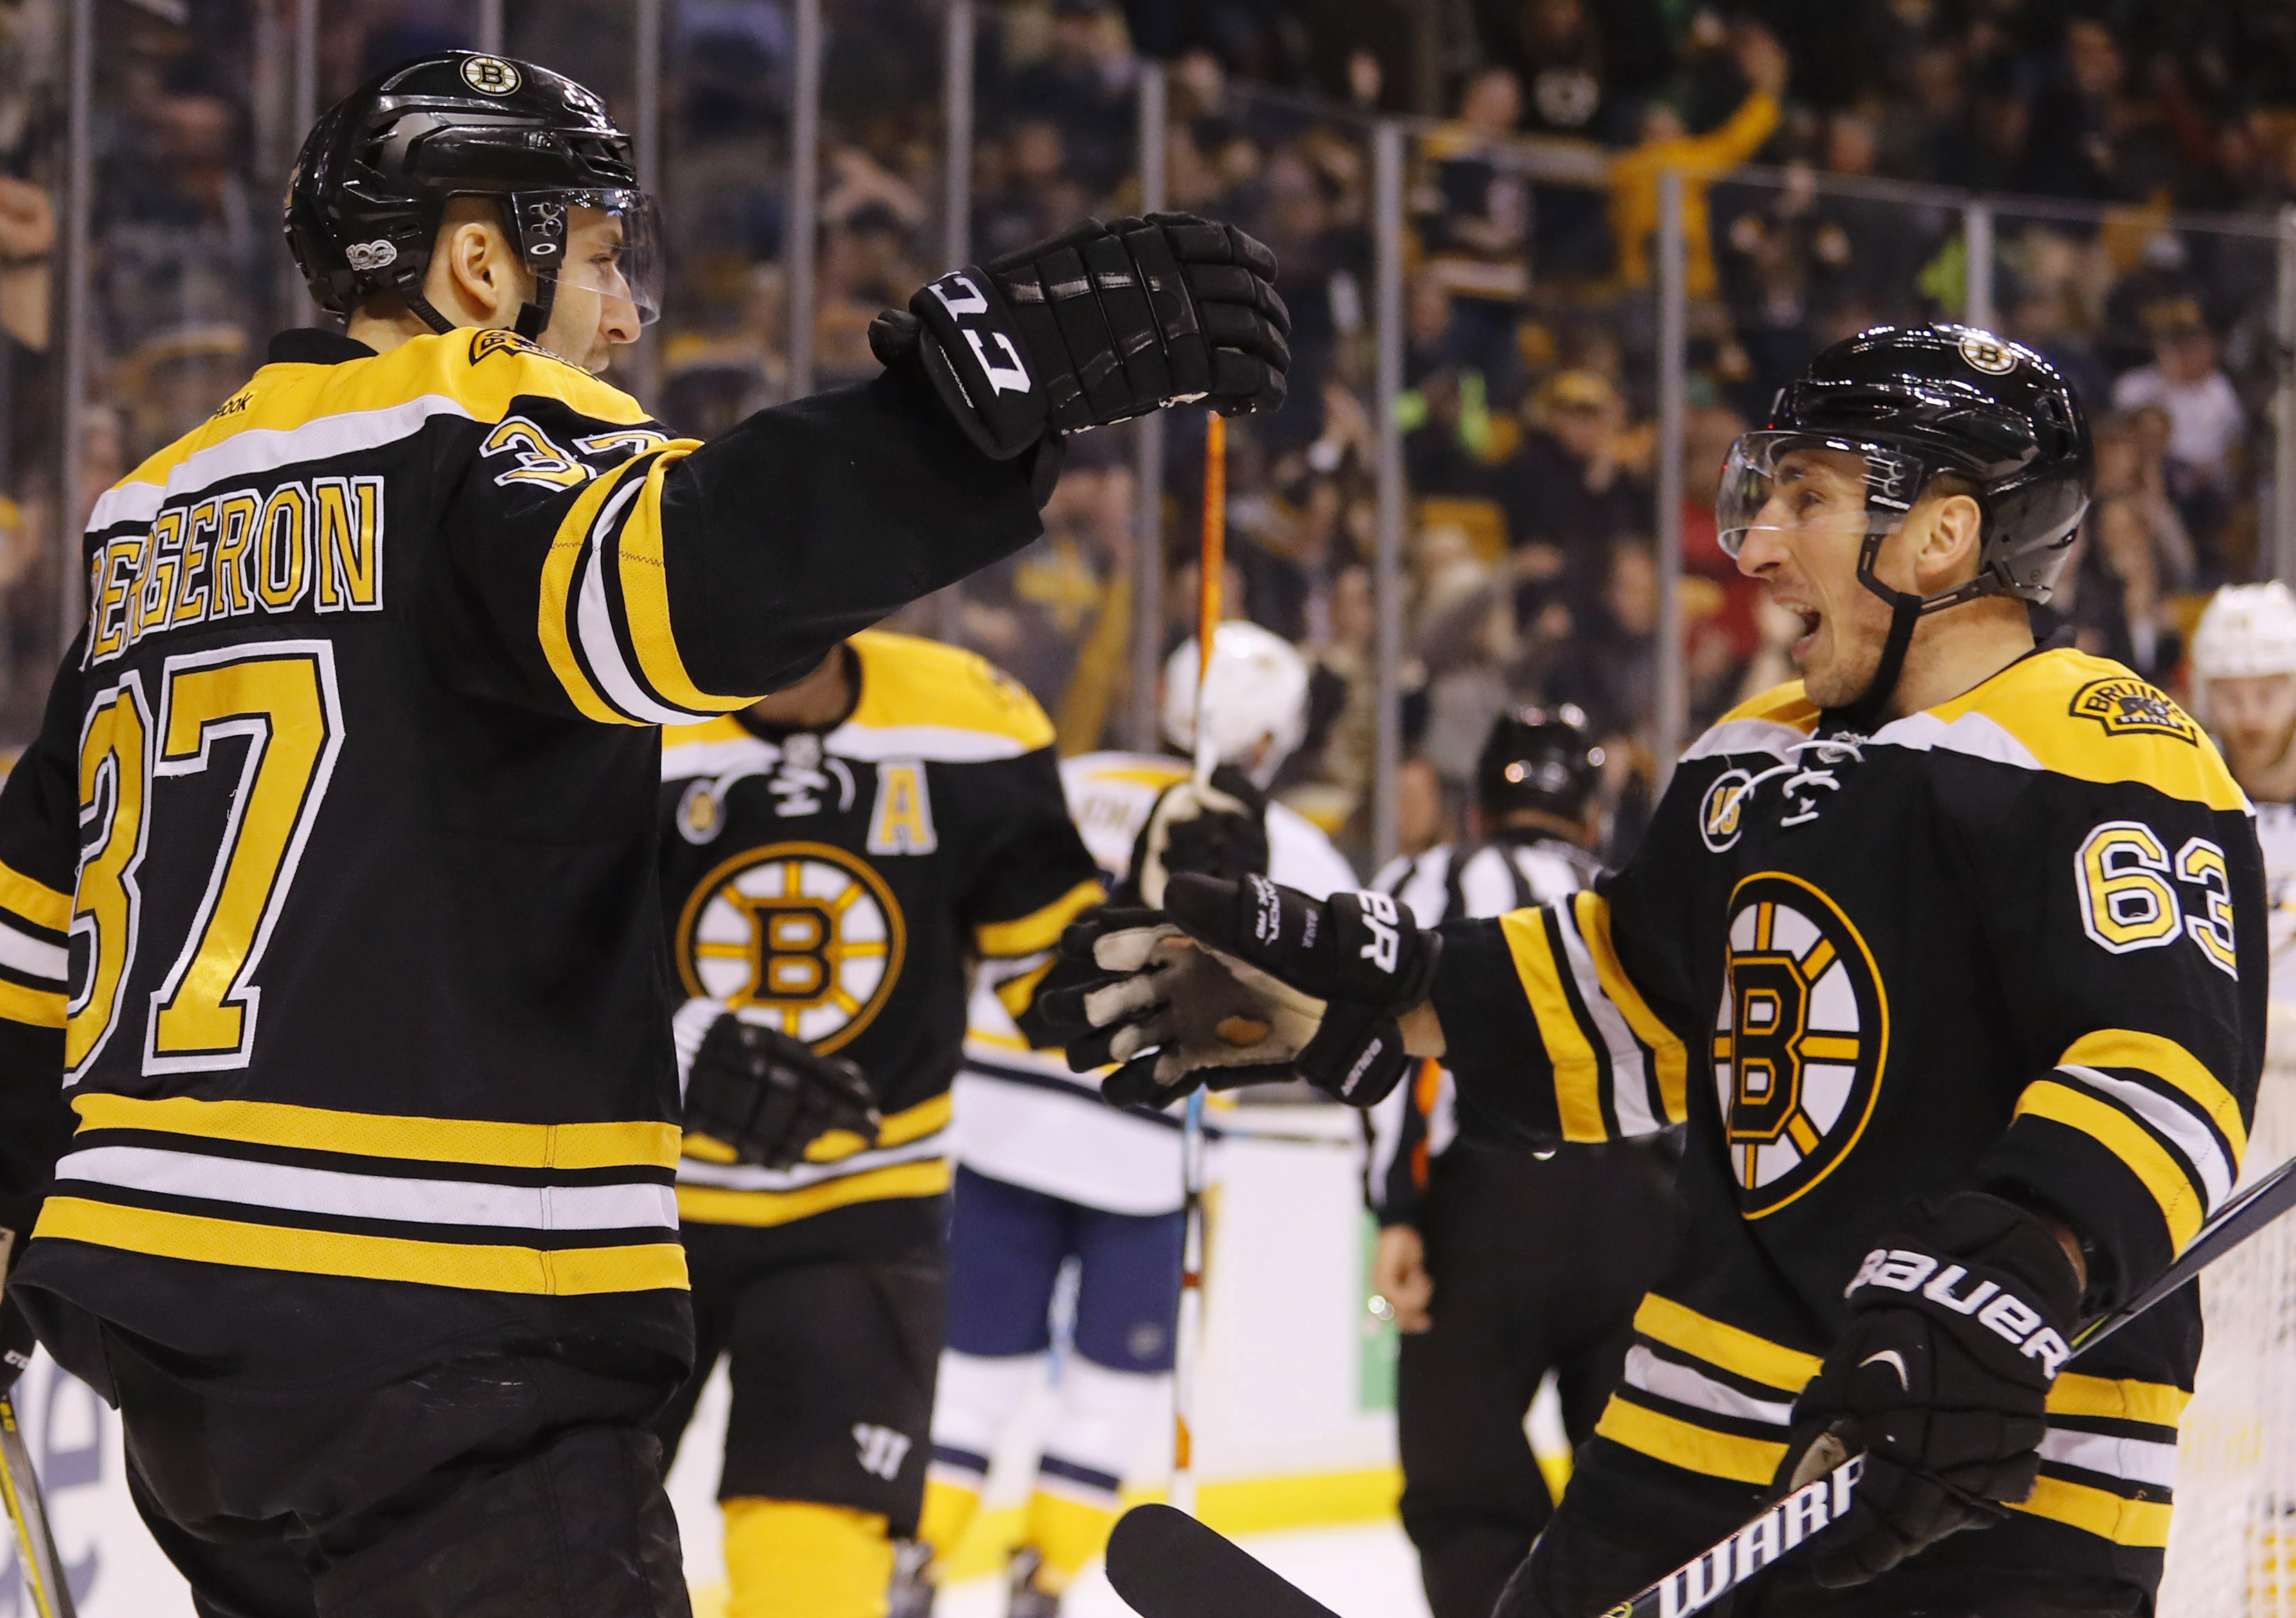 Nhl Playoffs 2017 5 Reasons Bruins Can Win Stanley Cup